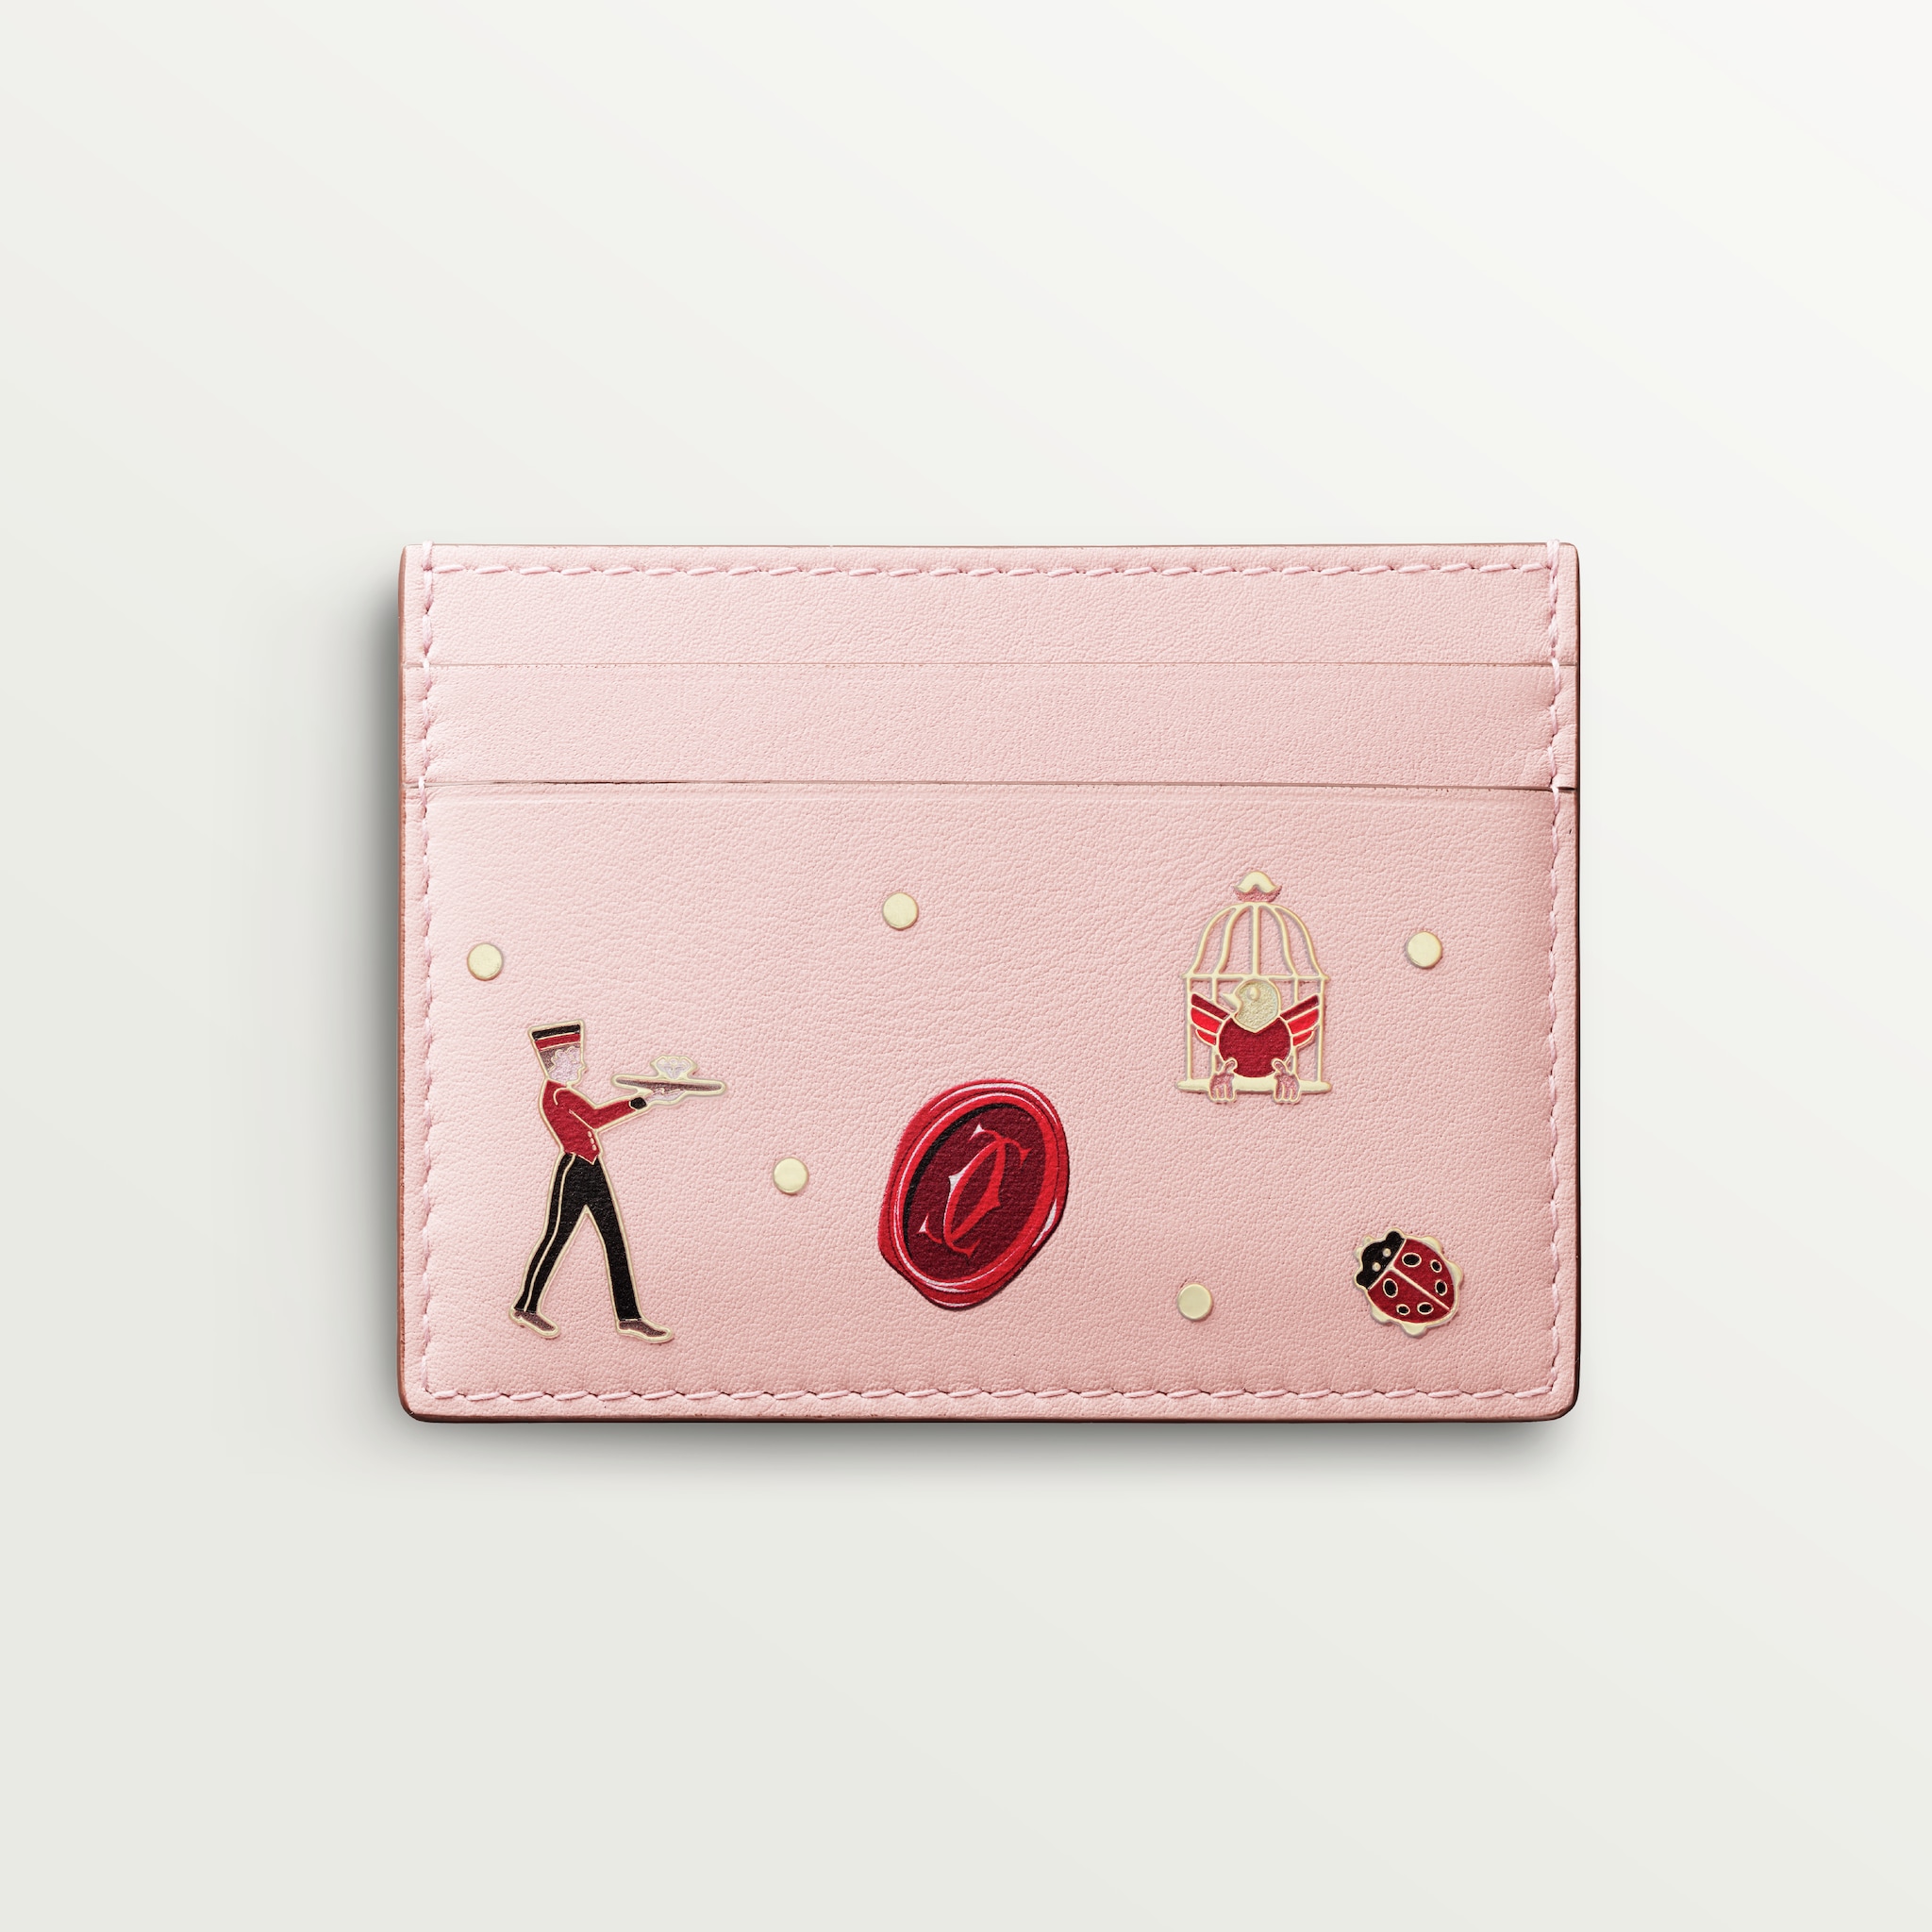 Small Leather Goods Classique Line Pale pink calfskin